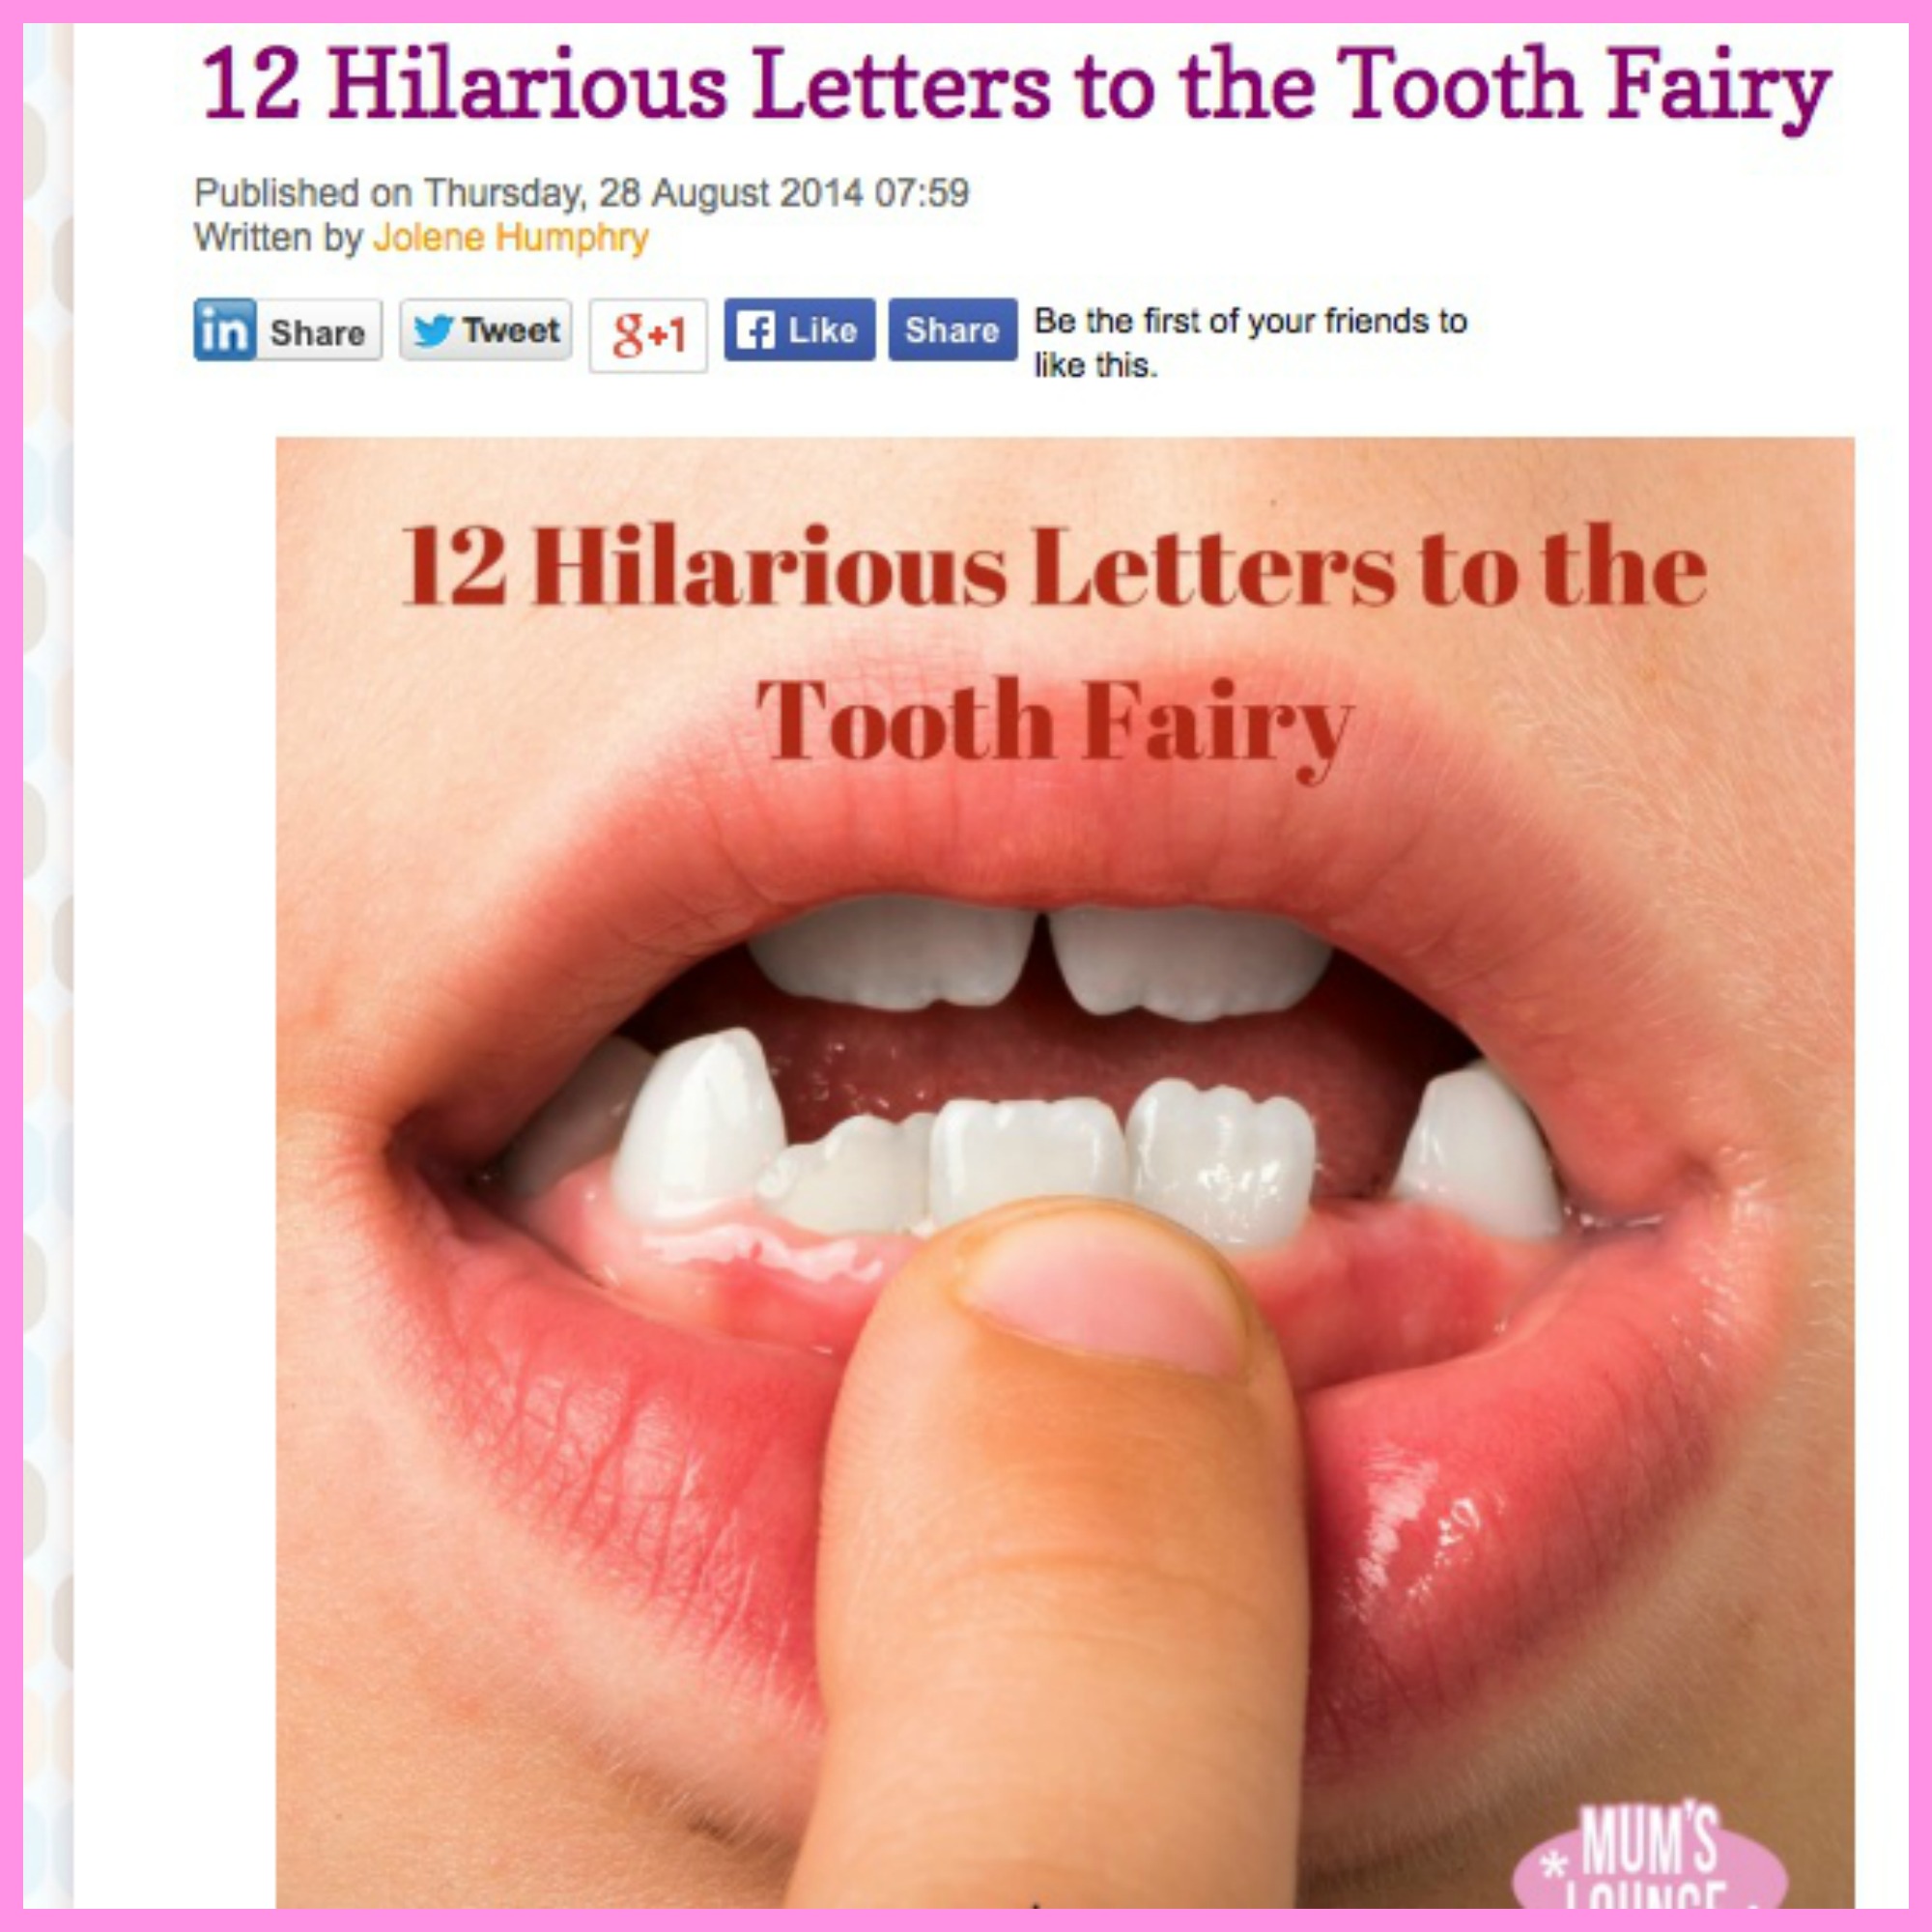 hilarious letters to the tooth fairy